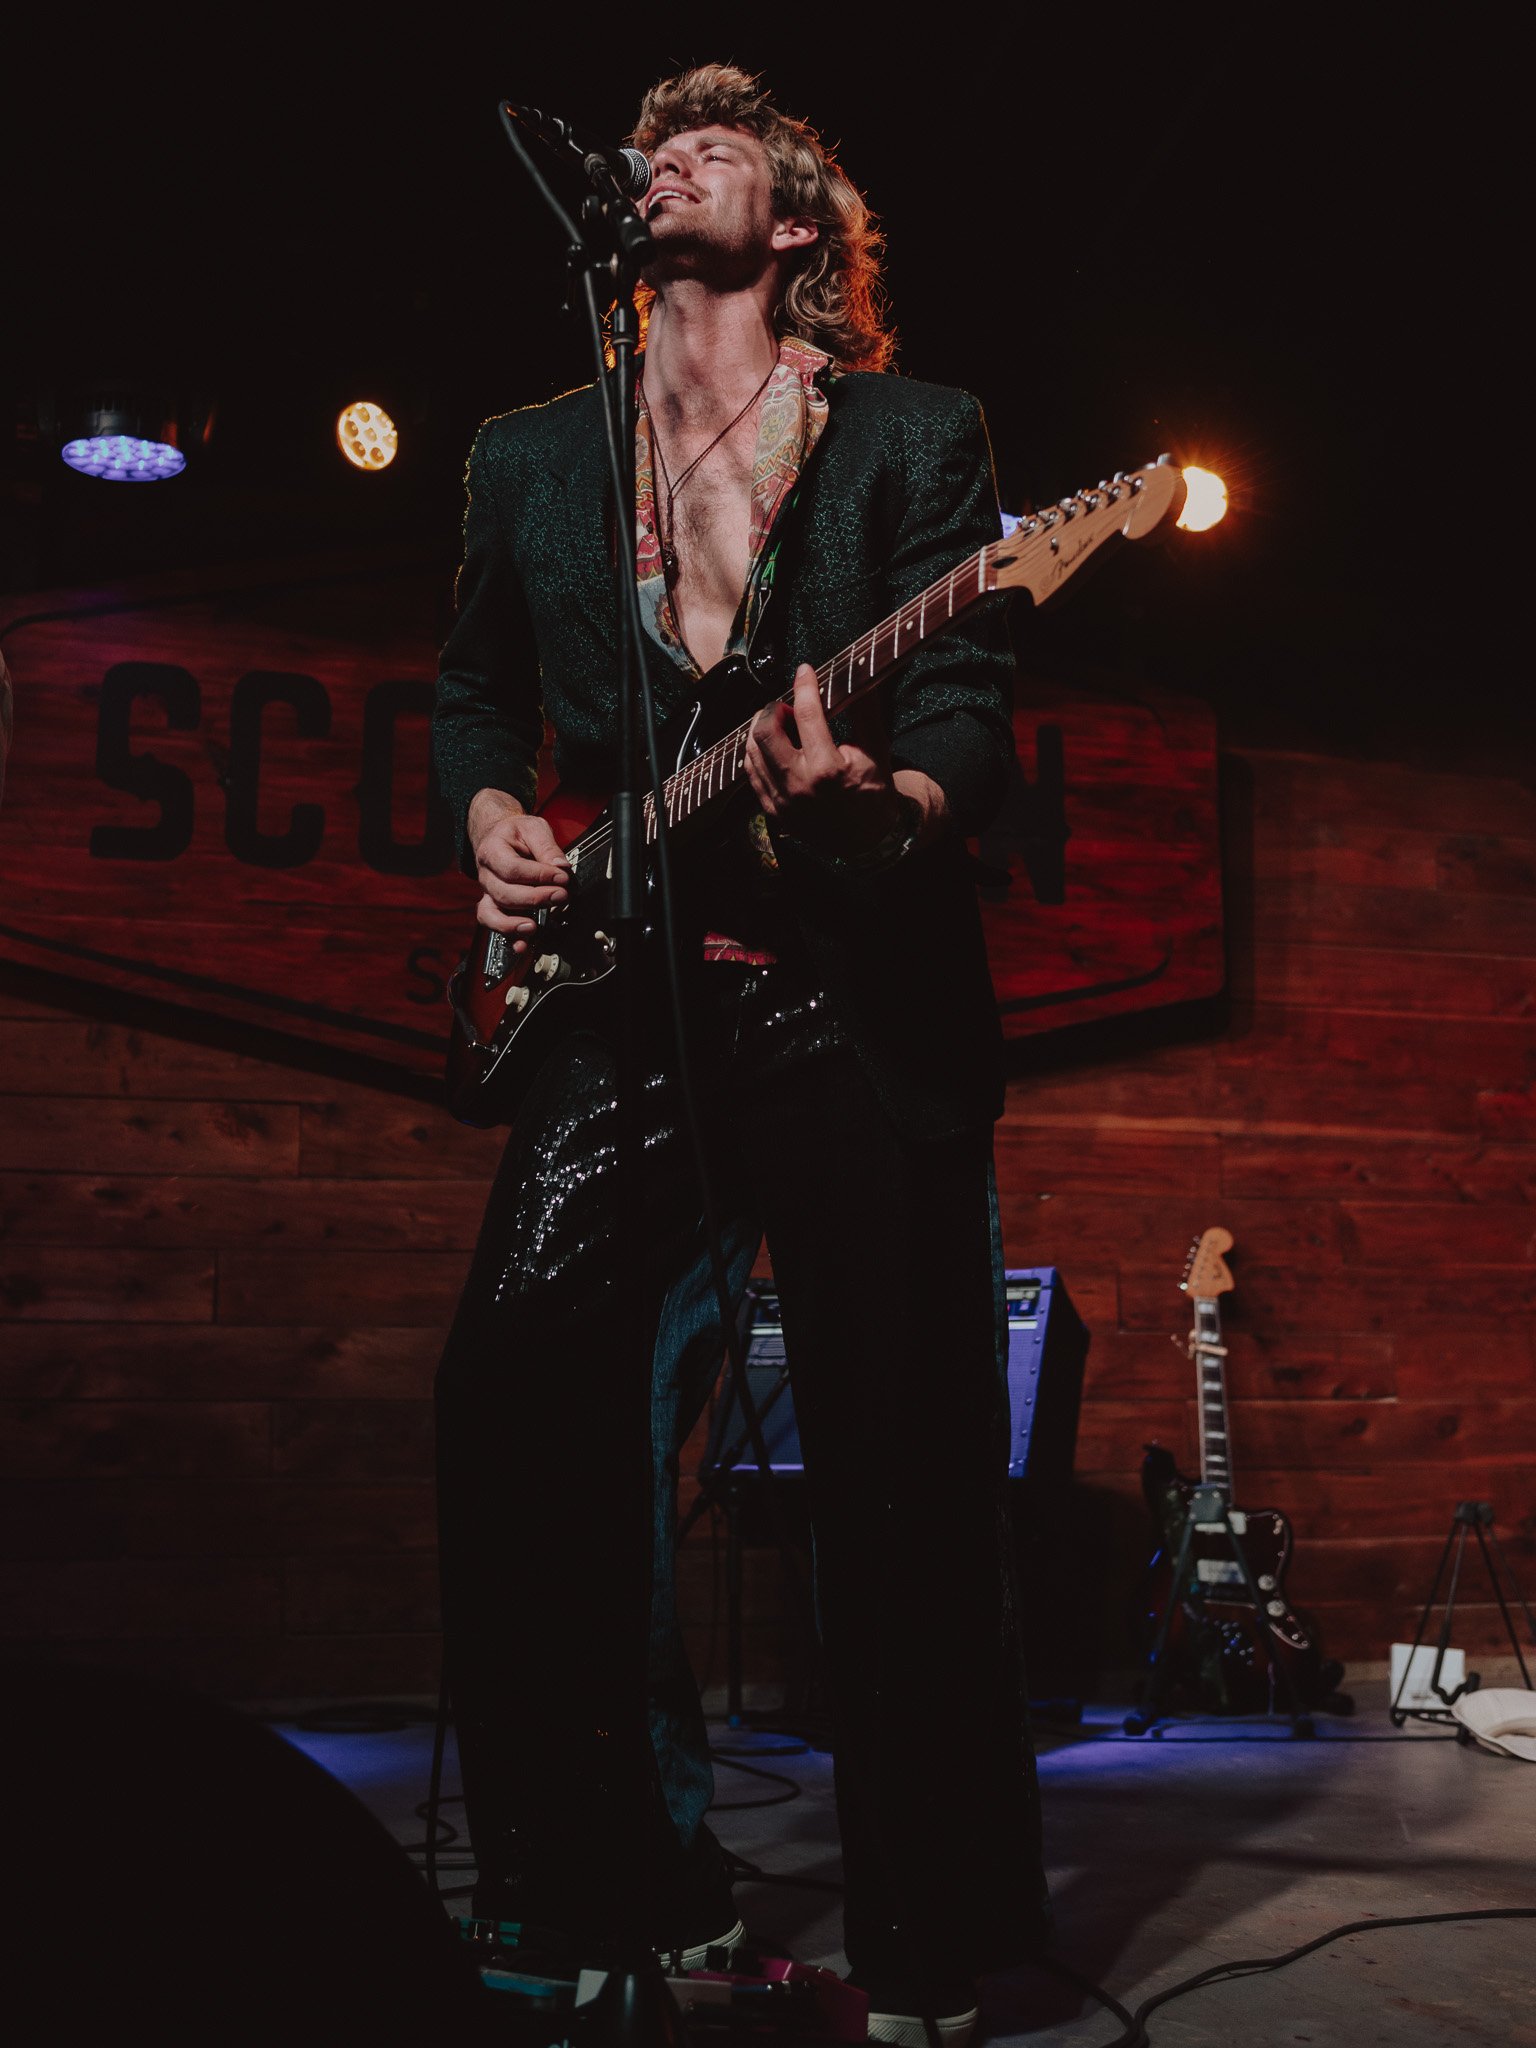  The Moss frontman Tyke James owns Scoot Inn’s historic stage in a sparkly black suit. 